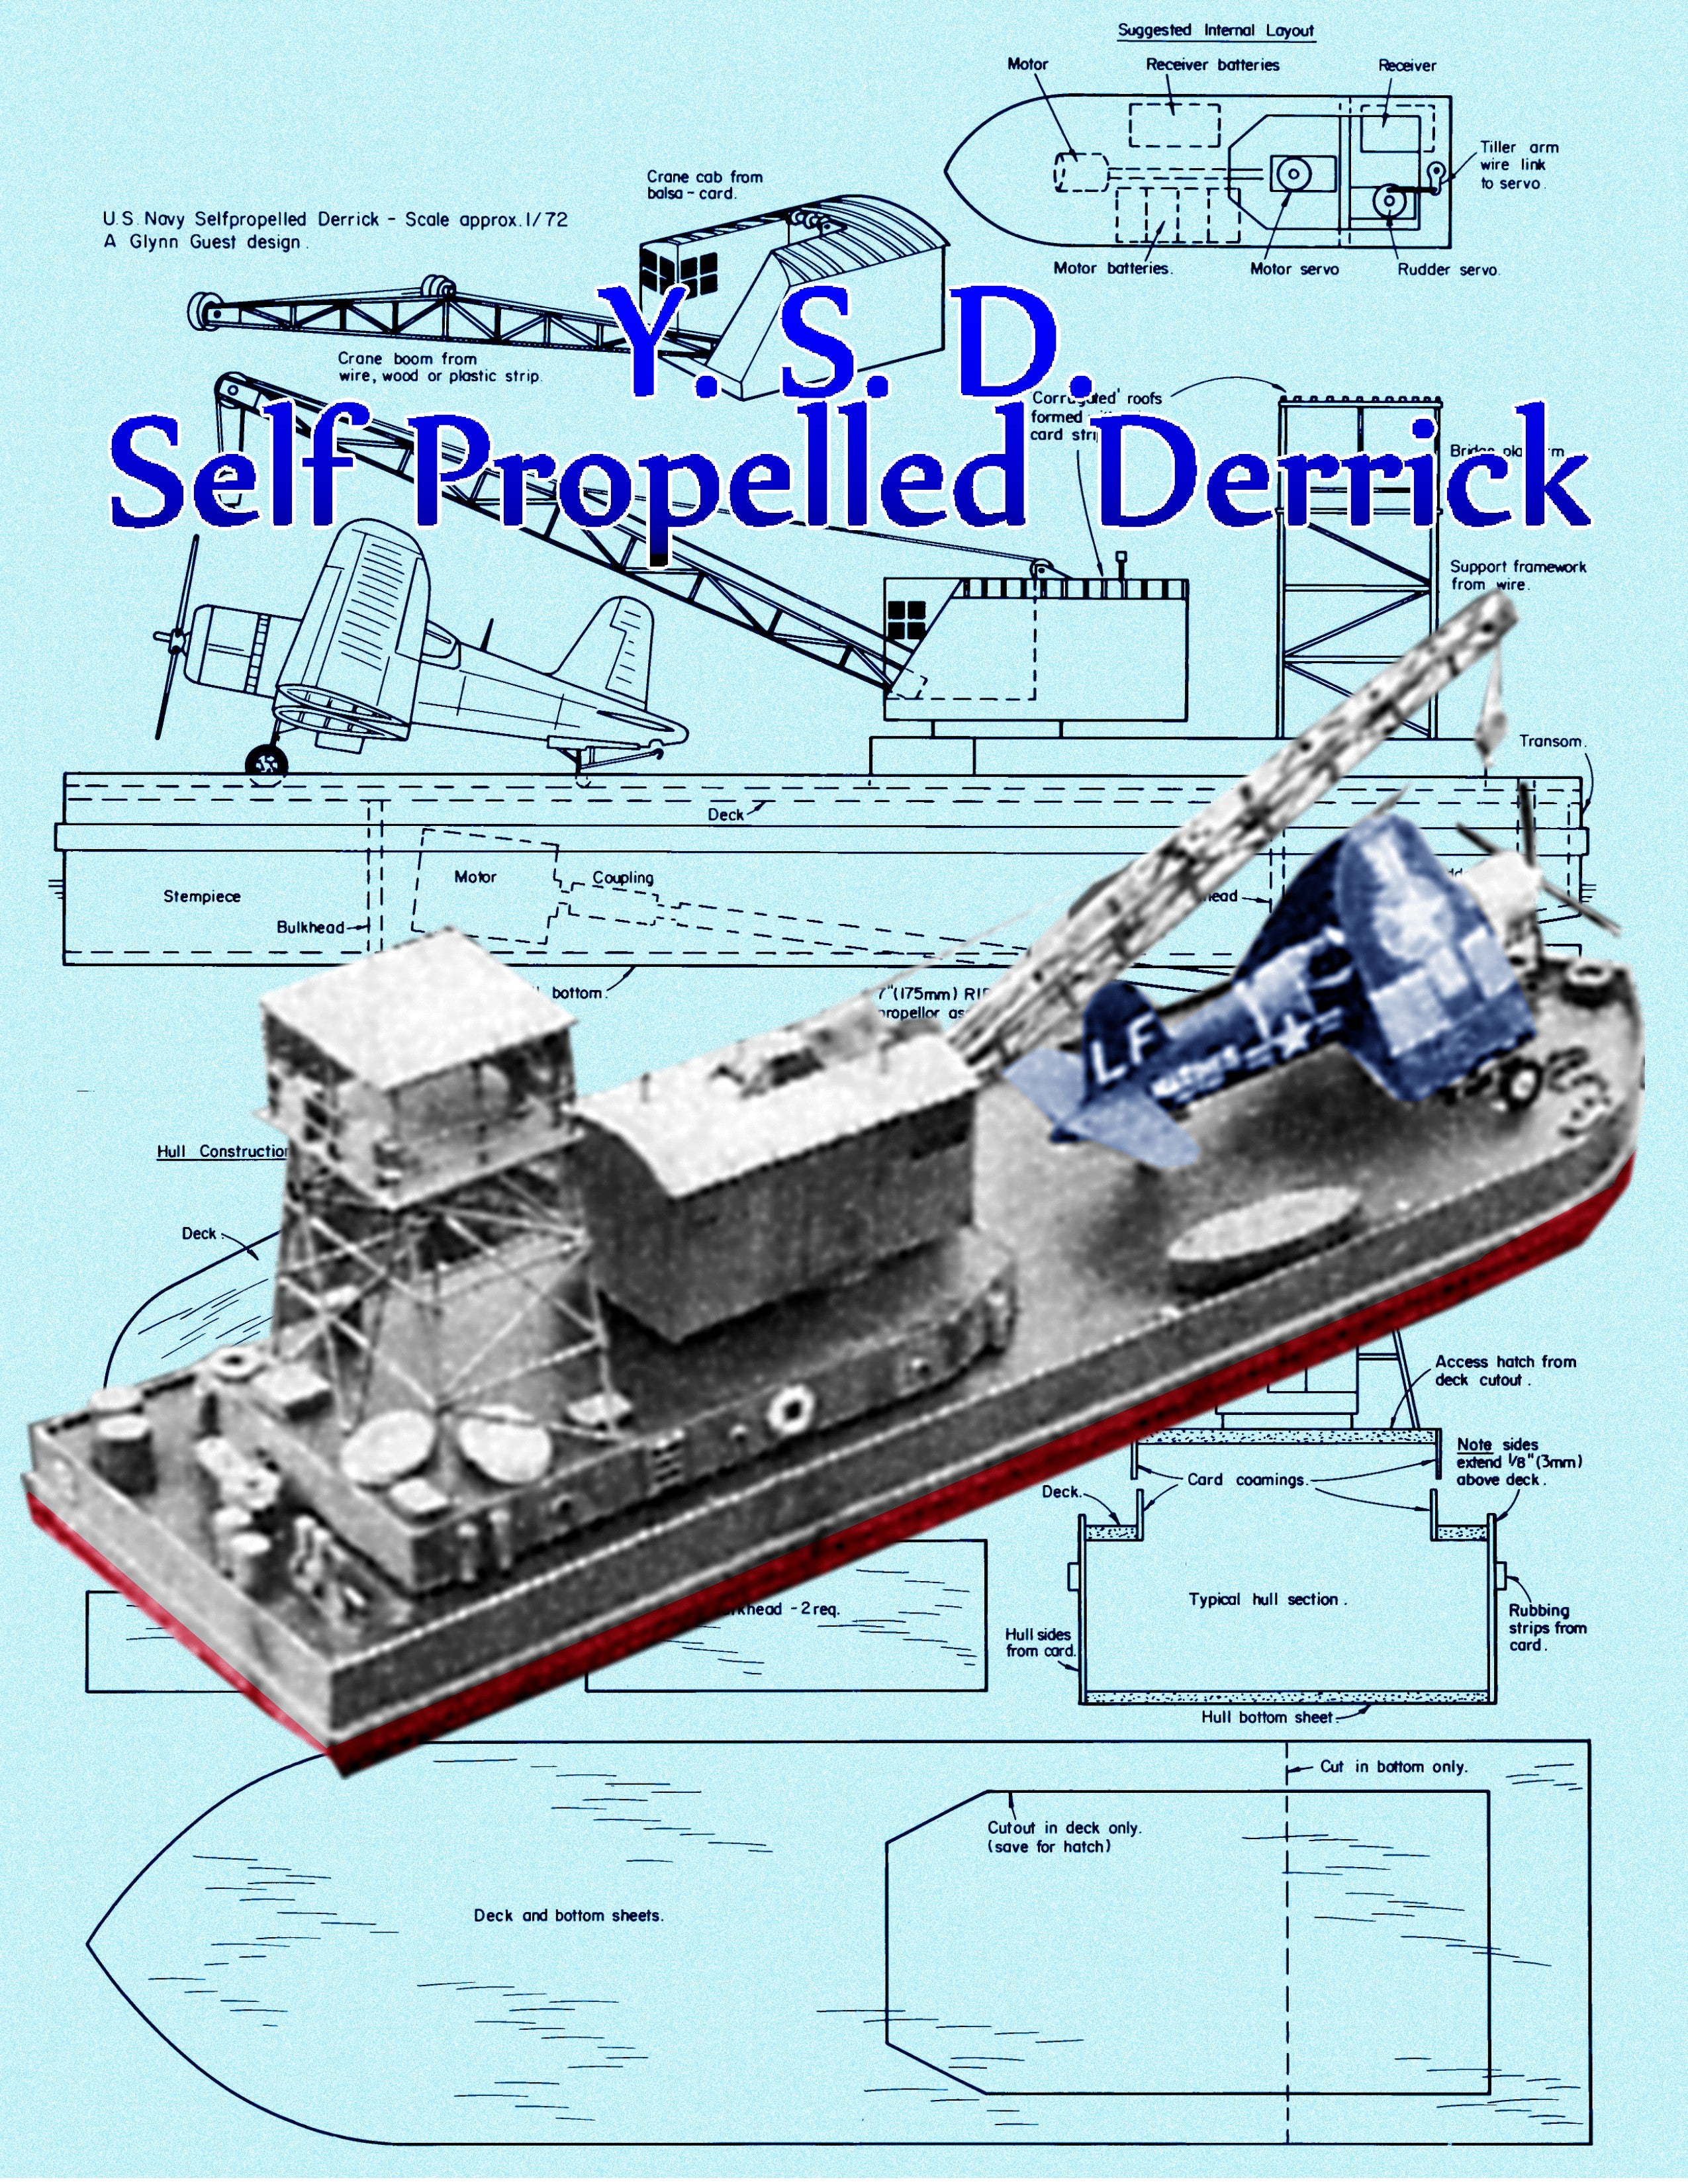 full size printed plans and article y.s.d.  self propelled derrick semi-scale 1:72  length 15"  for radio control